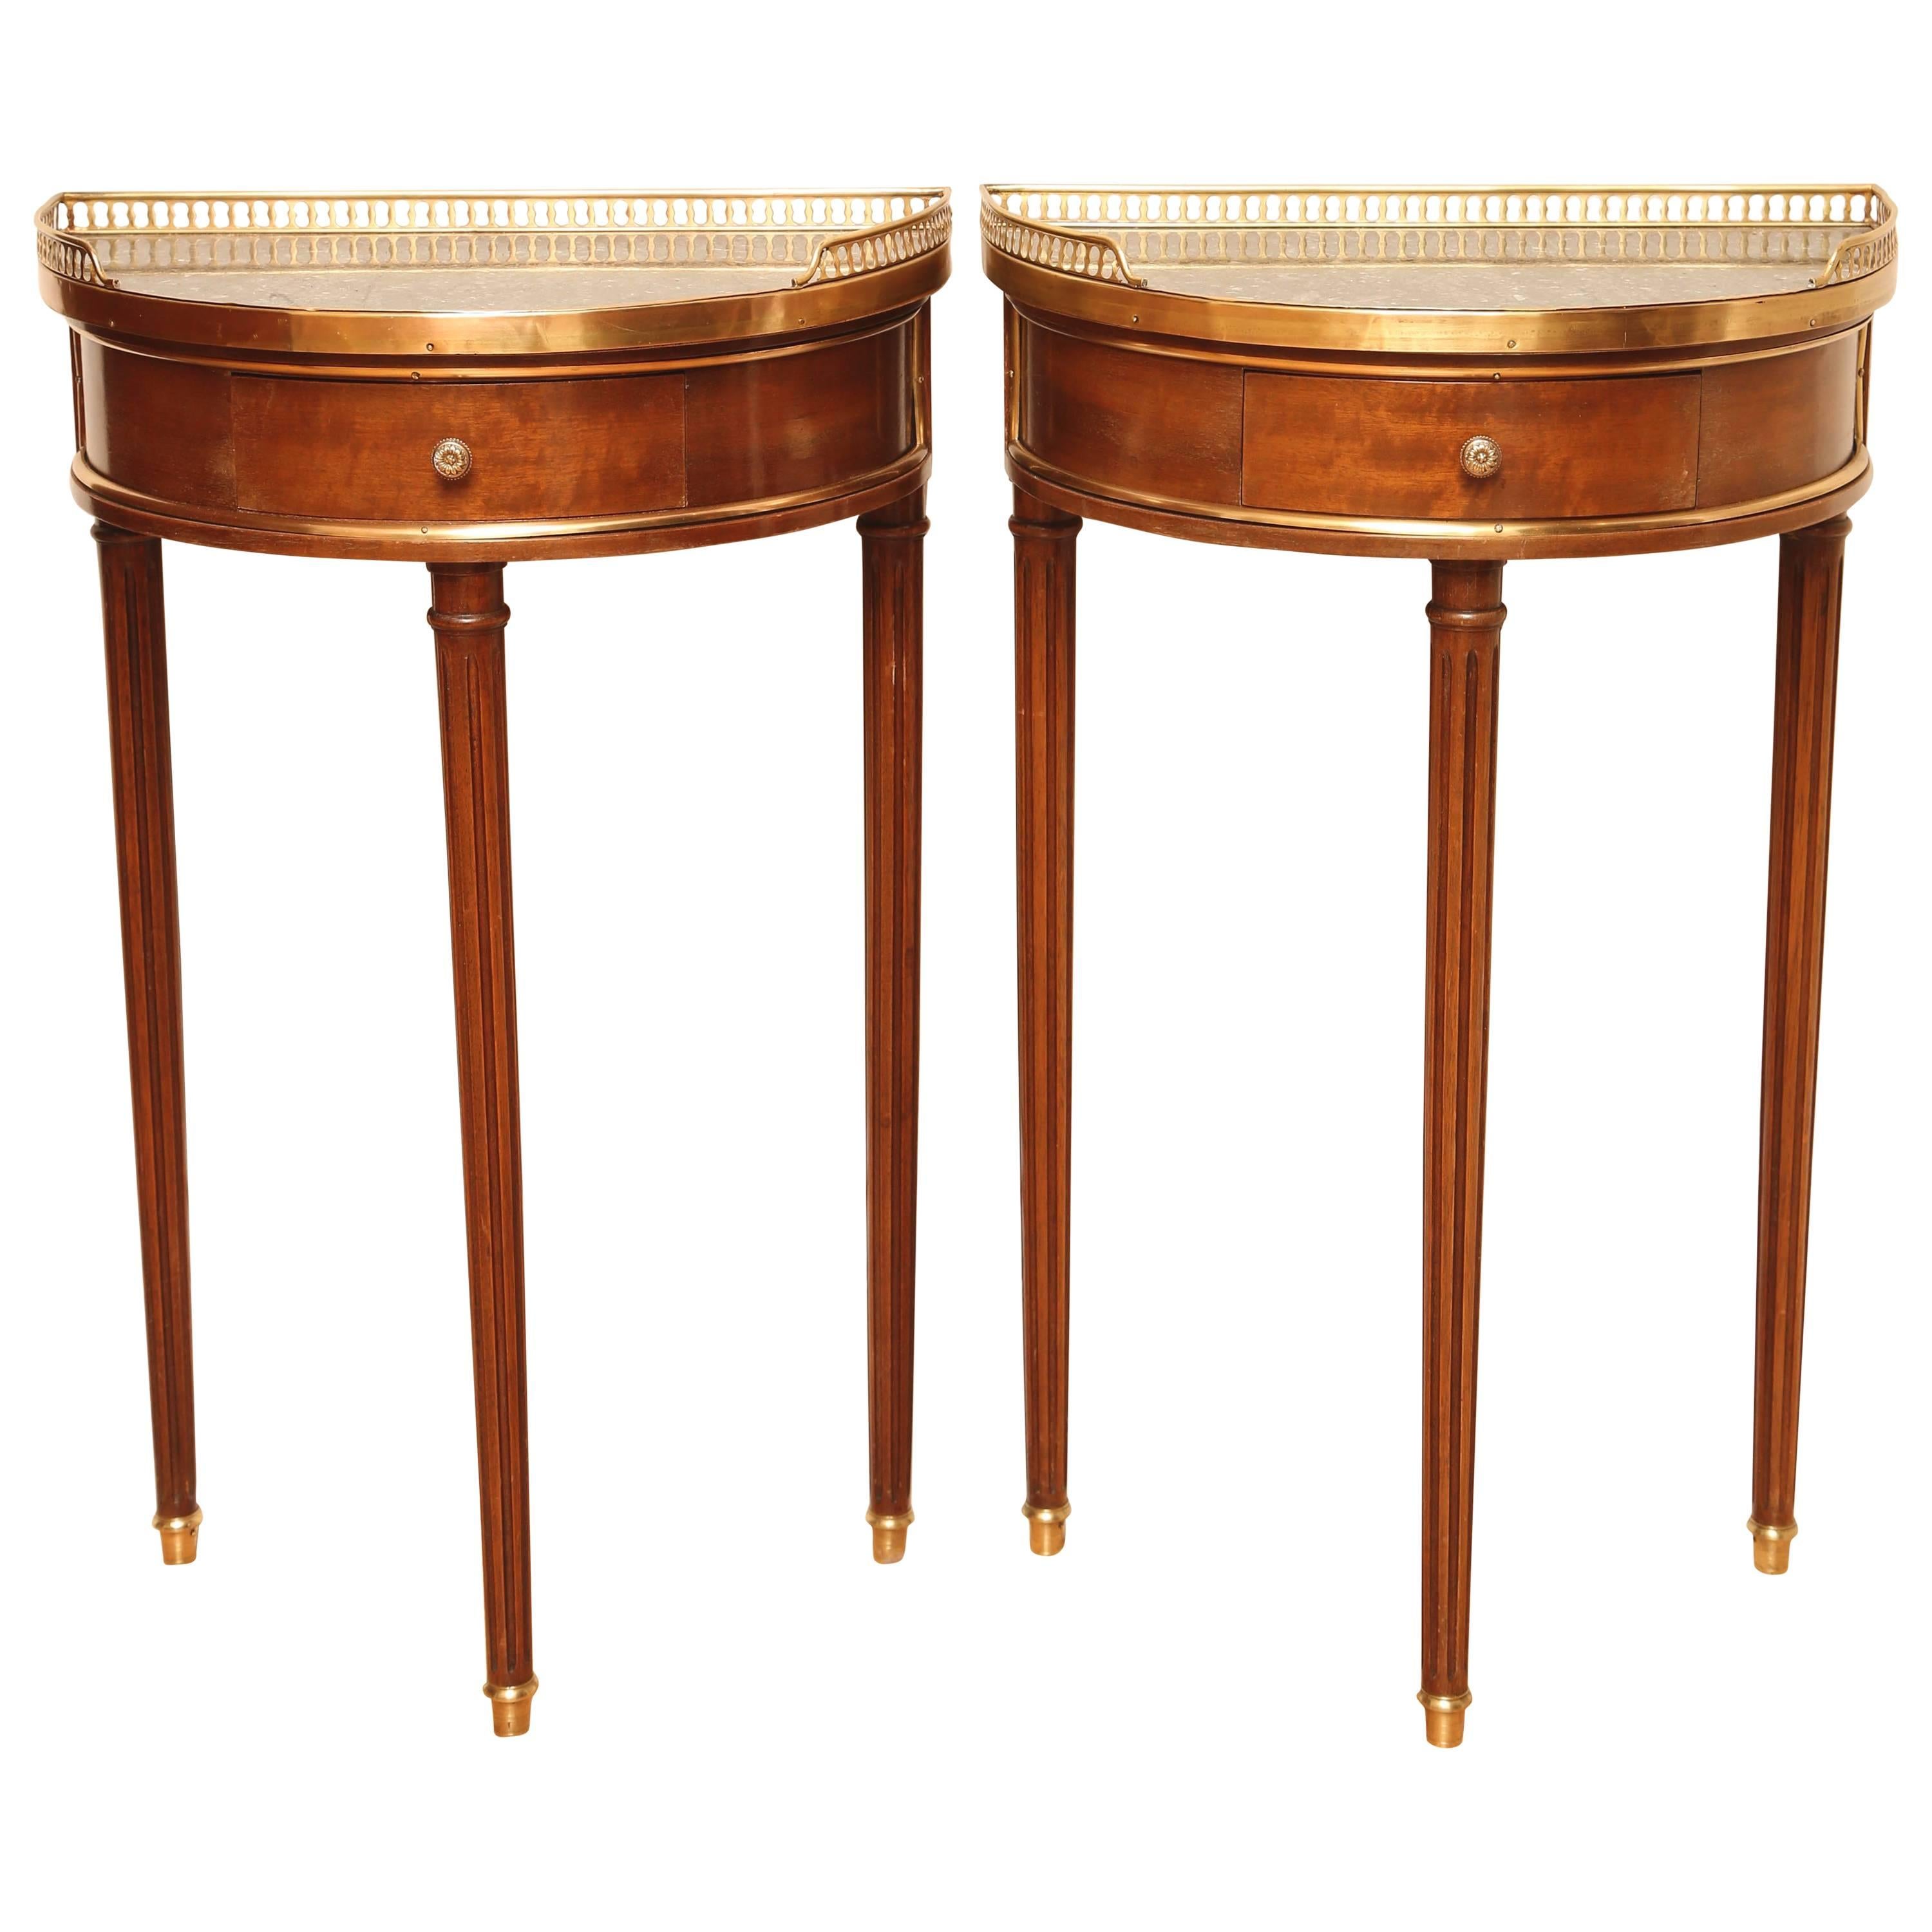 Pair of French Louis XVI Style Marble-Top Demilunes with Gallery